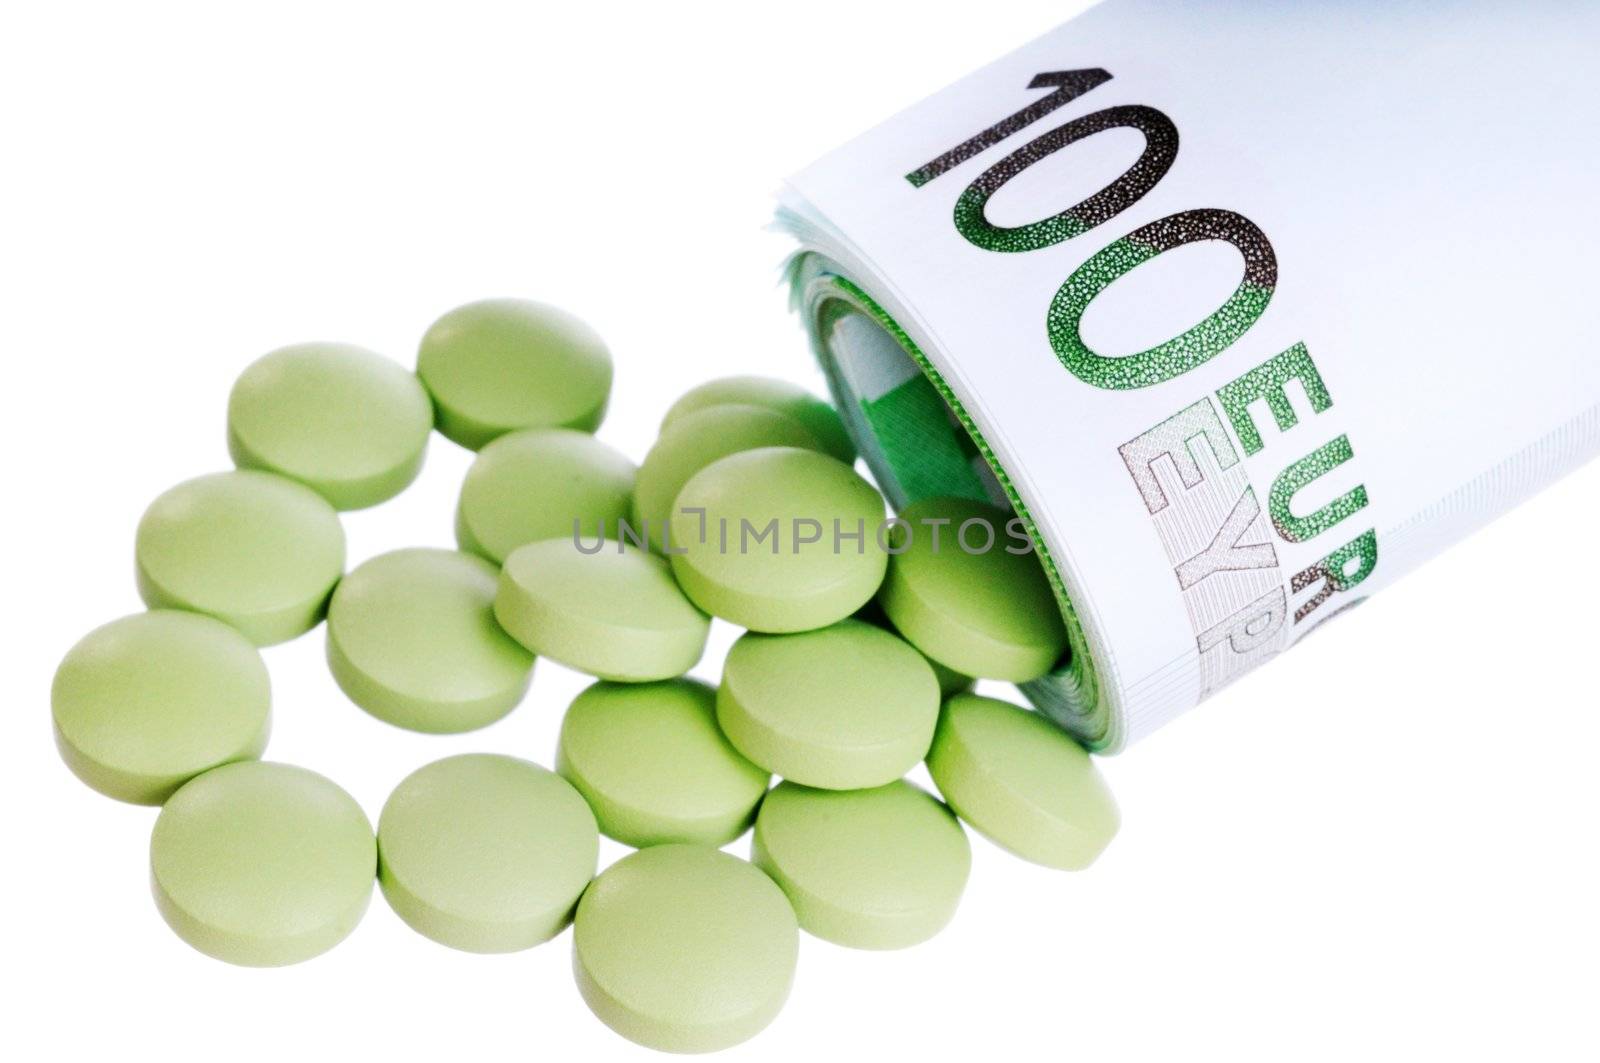 Green round pills fall out a sheaf of 100 euro papers